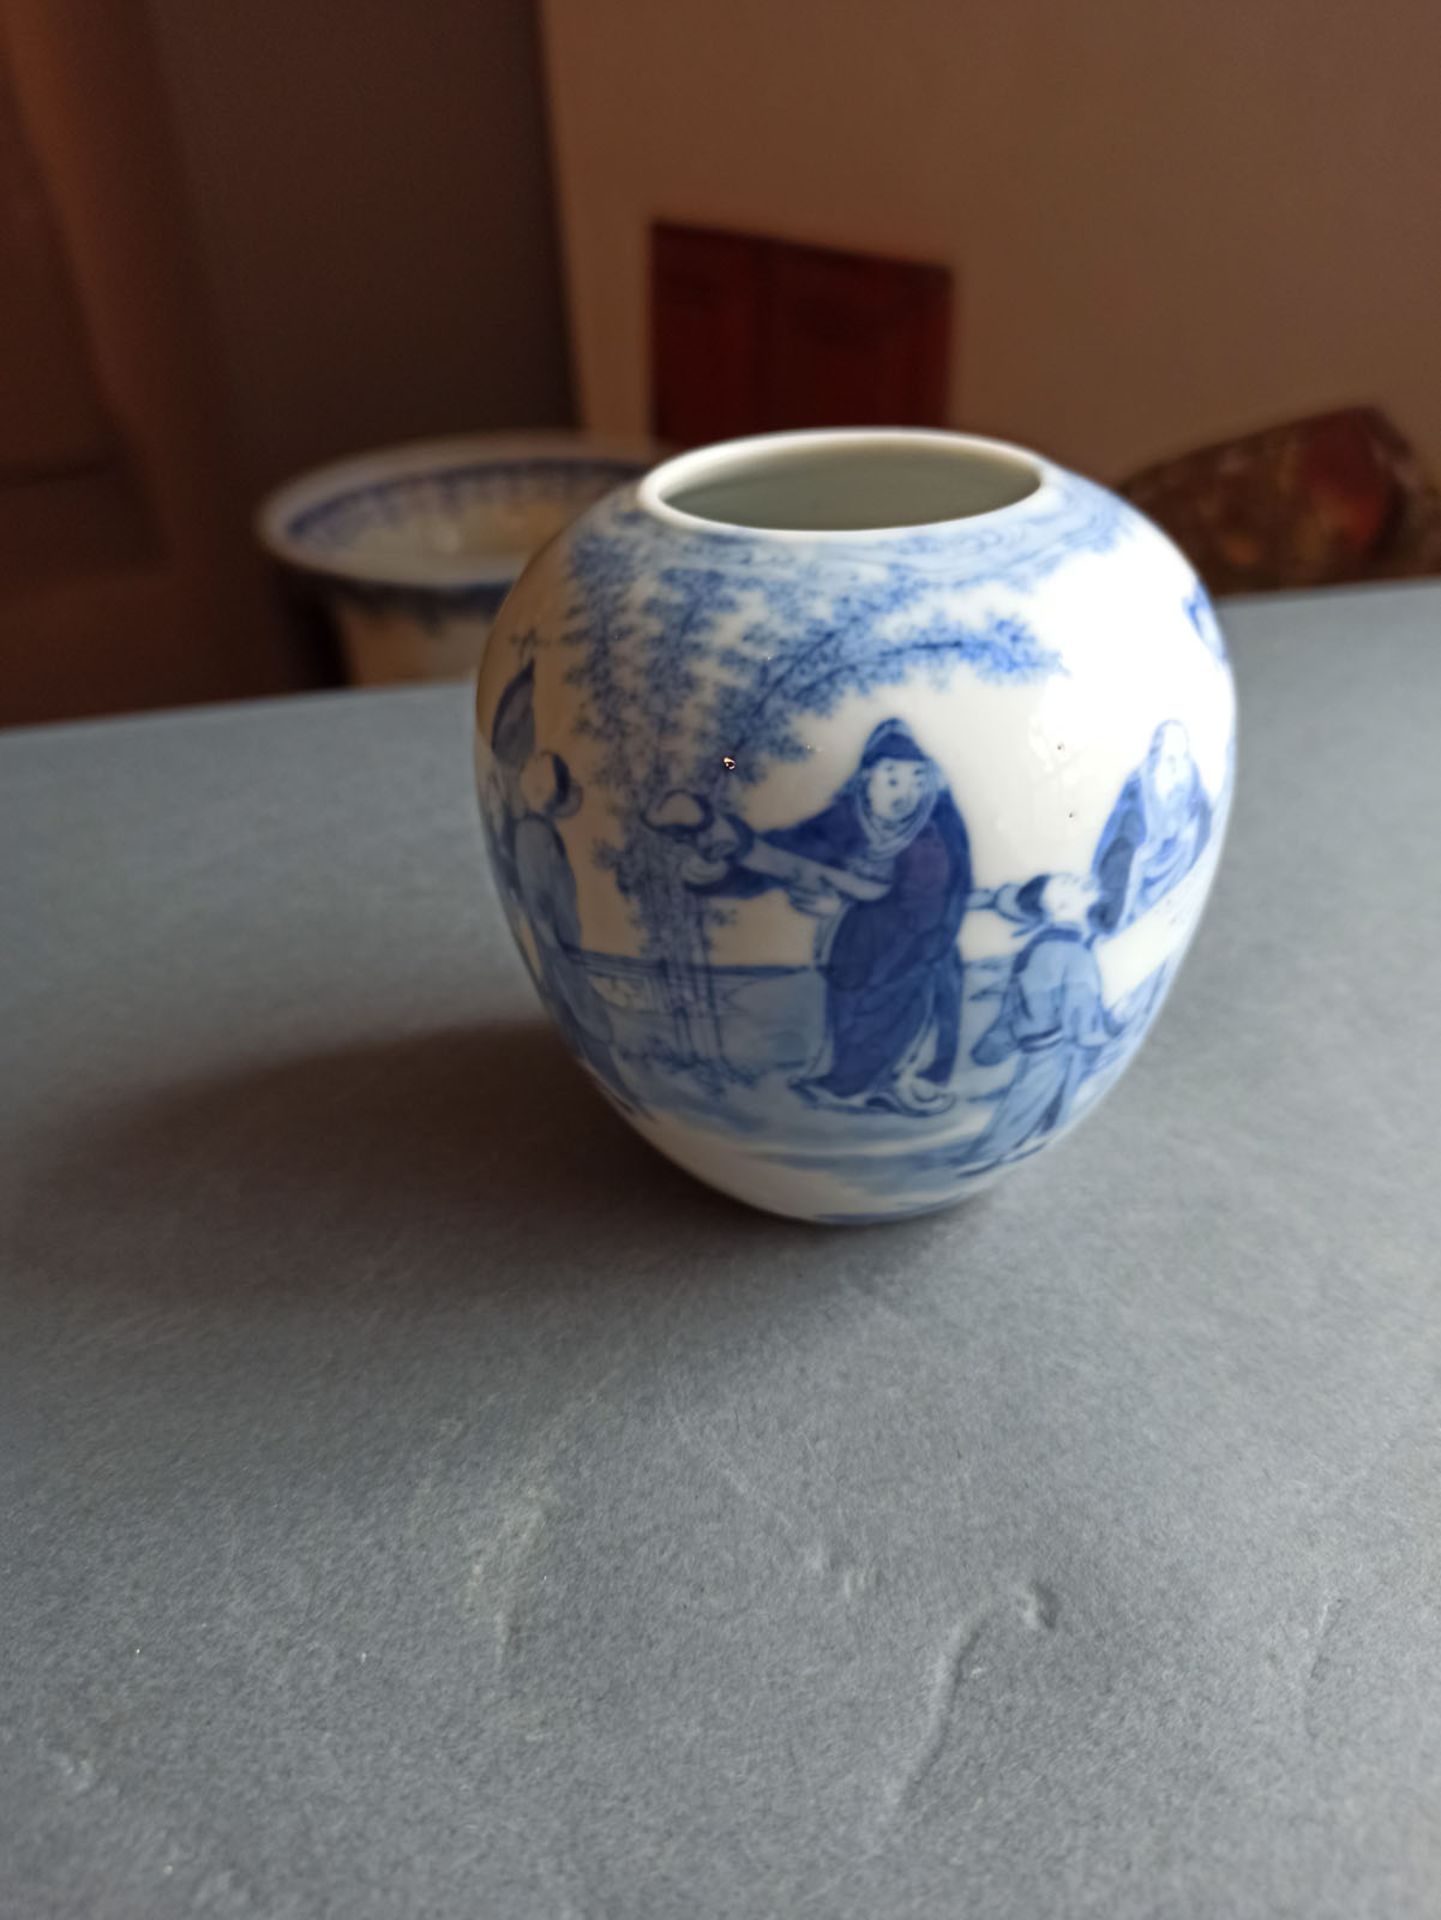 A GLOBULAR BLUE AND WHITE PORCELAIN WITH SCHIOLARS LOOKING AT A CALLIGRAPHY - Image 5 of 7